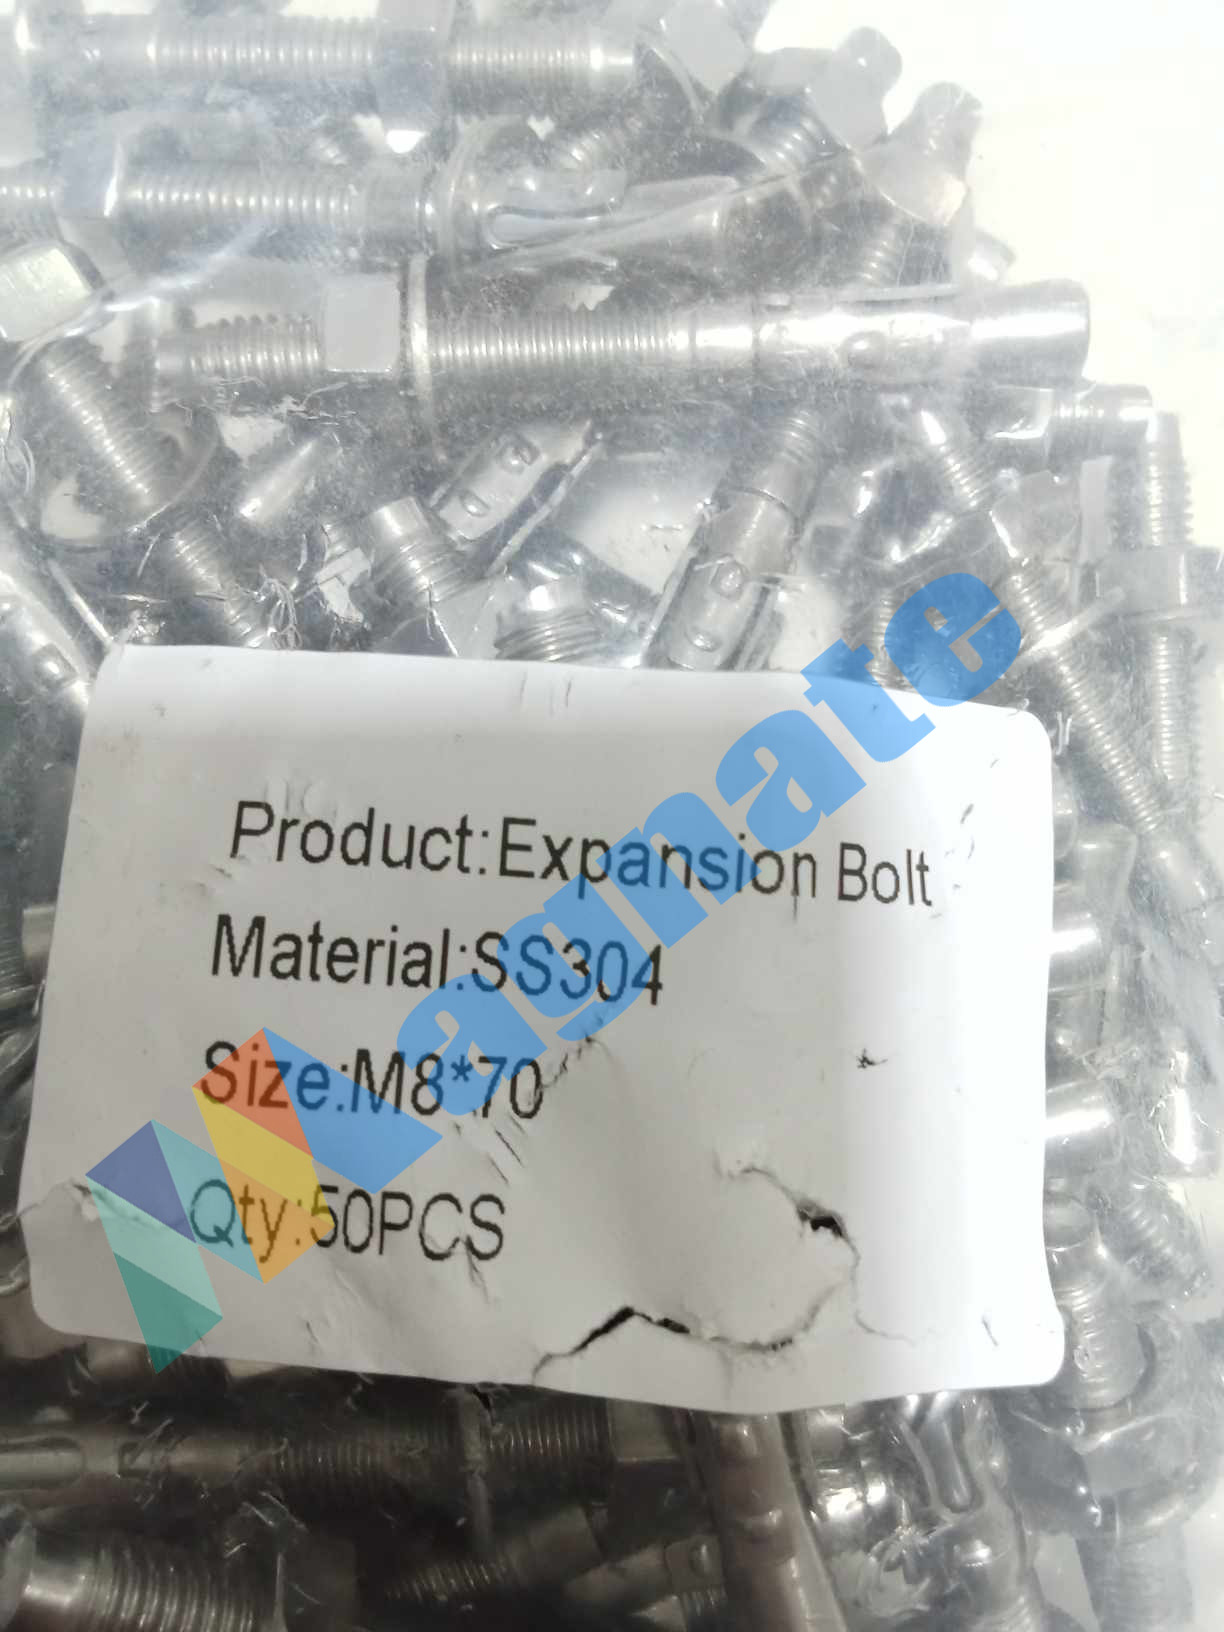 Expansion Bolt Material: SS304 Size: M8*70